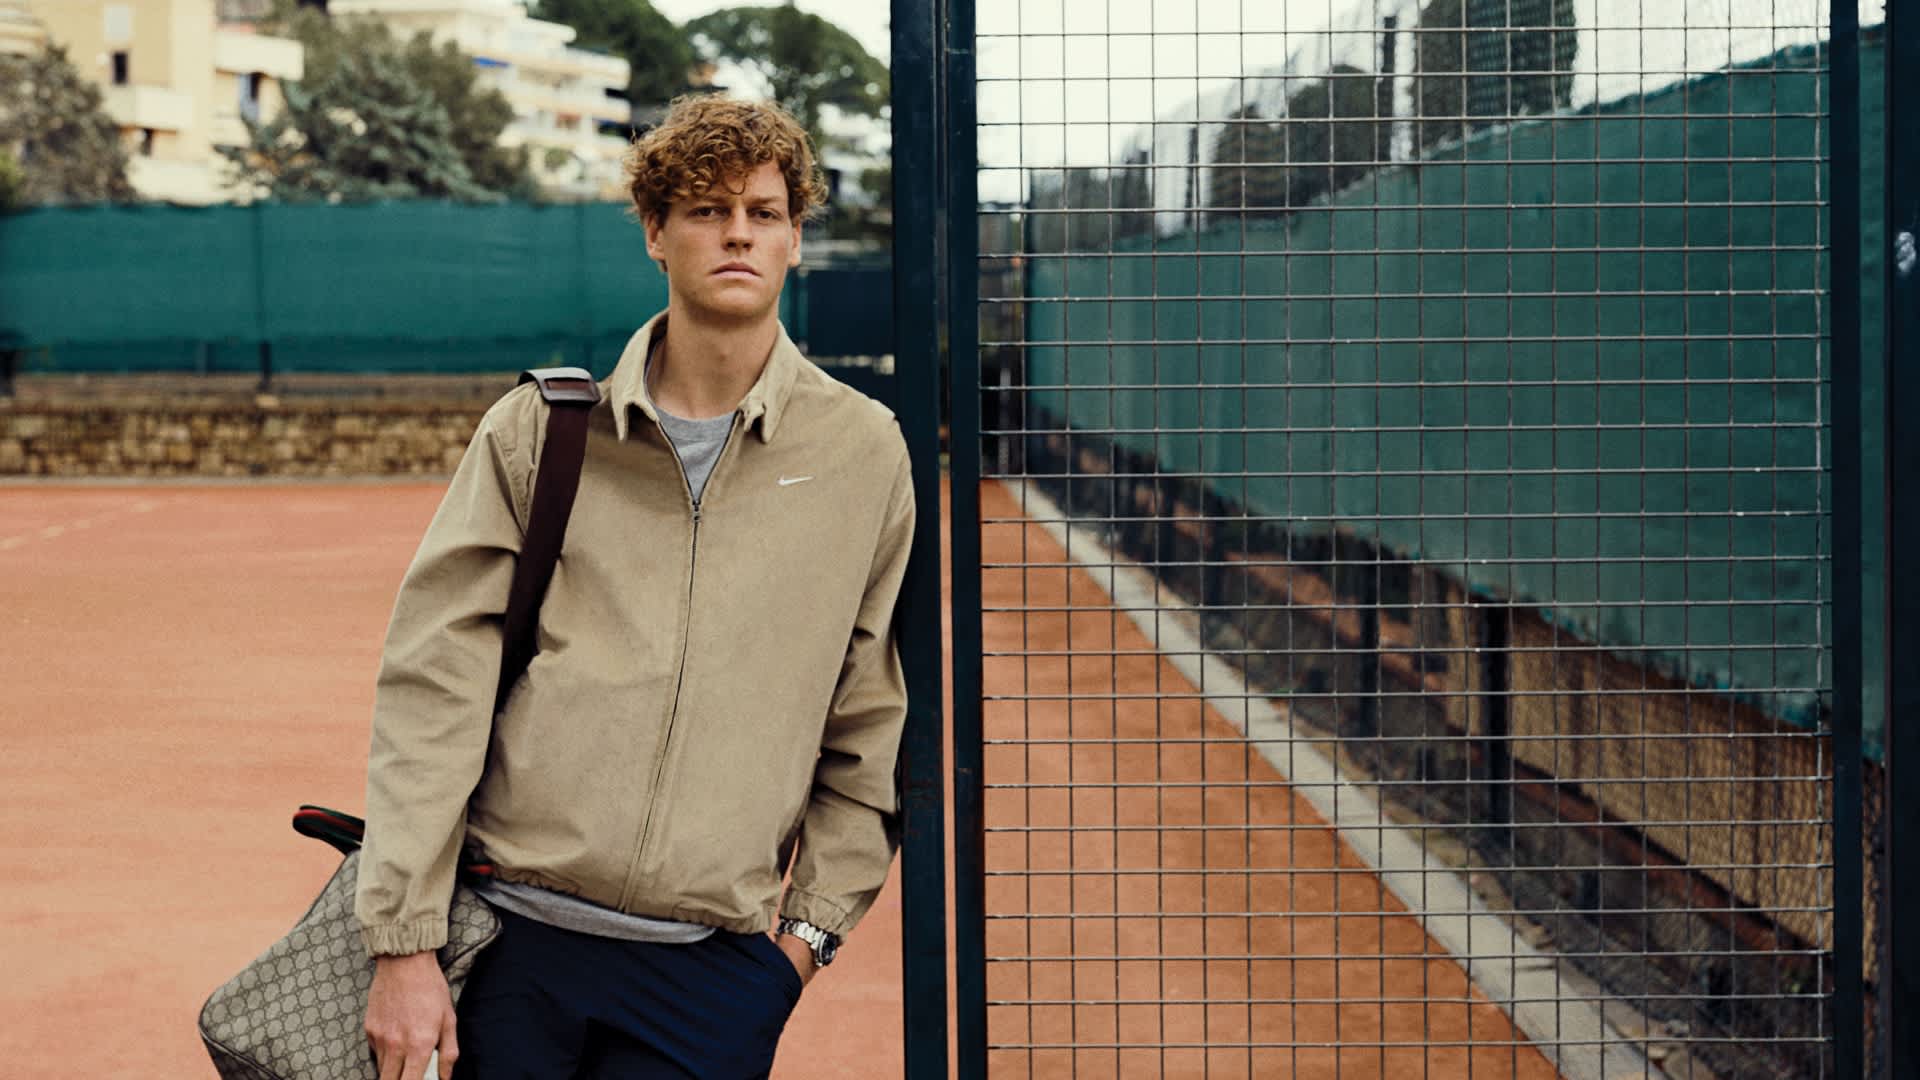 Nike cotton Harrington jacket, £61.65, cotton T-shirt, £22.99, elastane tennis shorts, £54.99, cotton socks, £16.99, and mesh Court Air Zoom Vapor Pro 2 sneakers, £83,99. Gucci canvas leather duffle bag, Rolex Oystersteel Oyster Perpetual Submariner watch and Head racket, all Sinner’s own